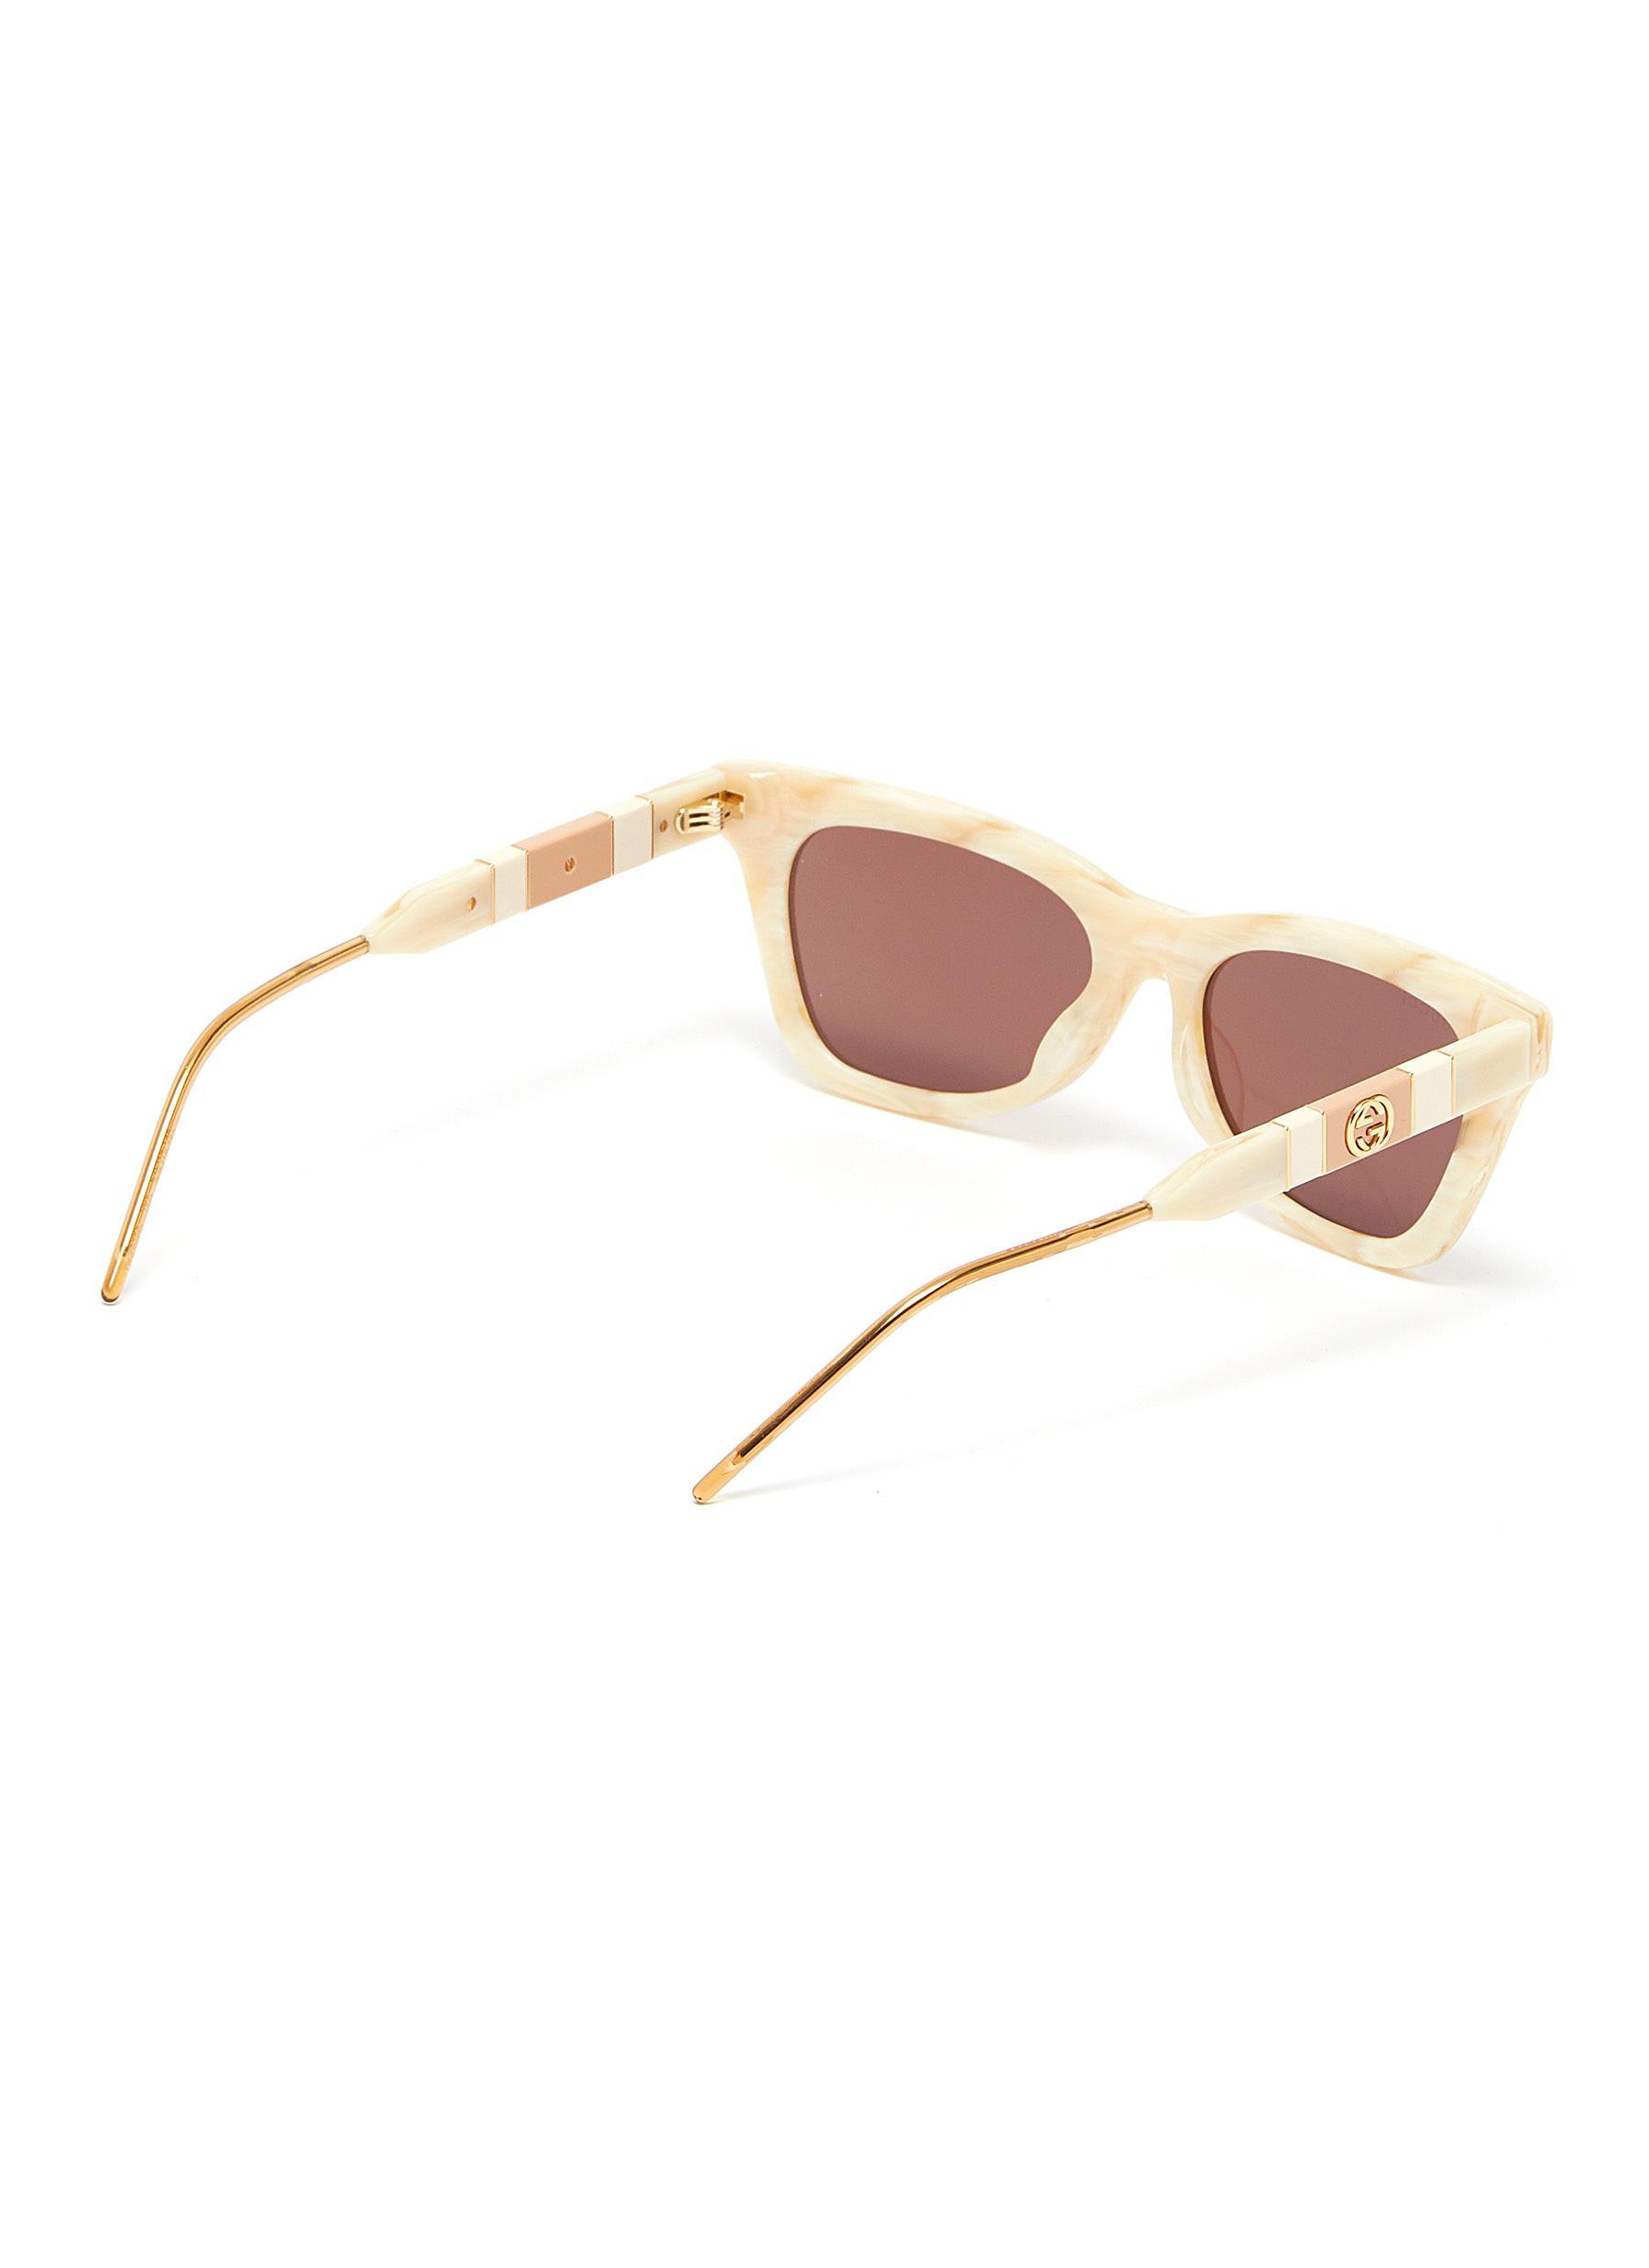 Gucci Marble Effect Acetate Frame Cat Eye Sunglasses in White | Lyst